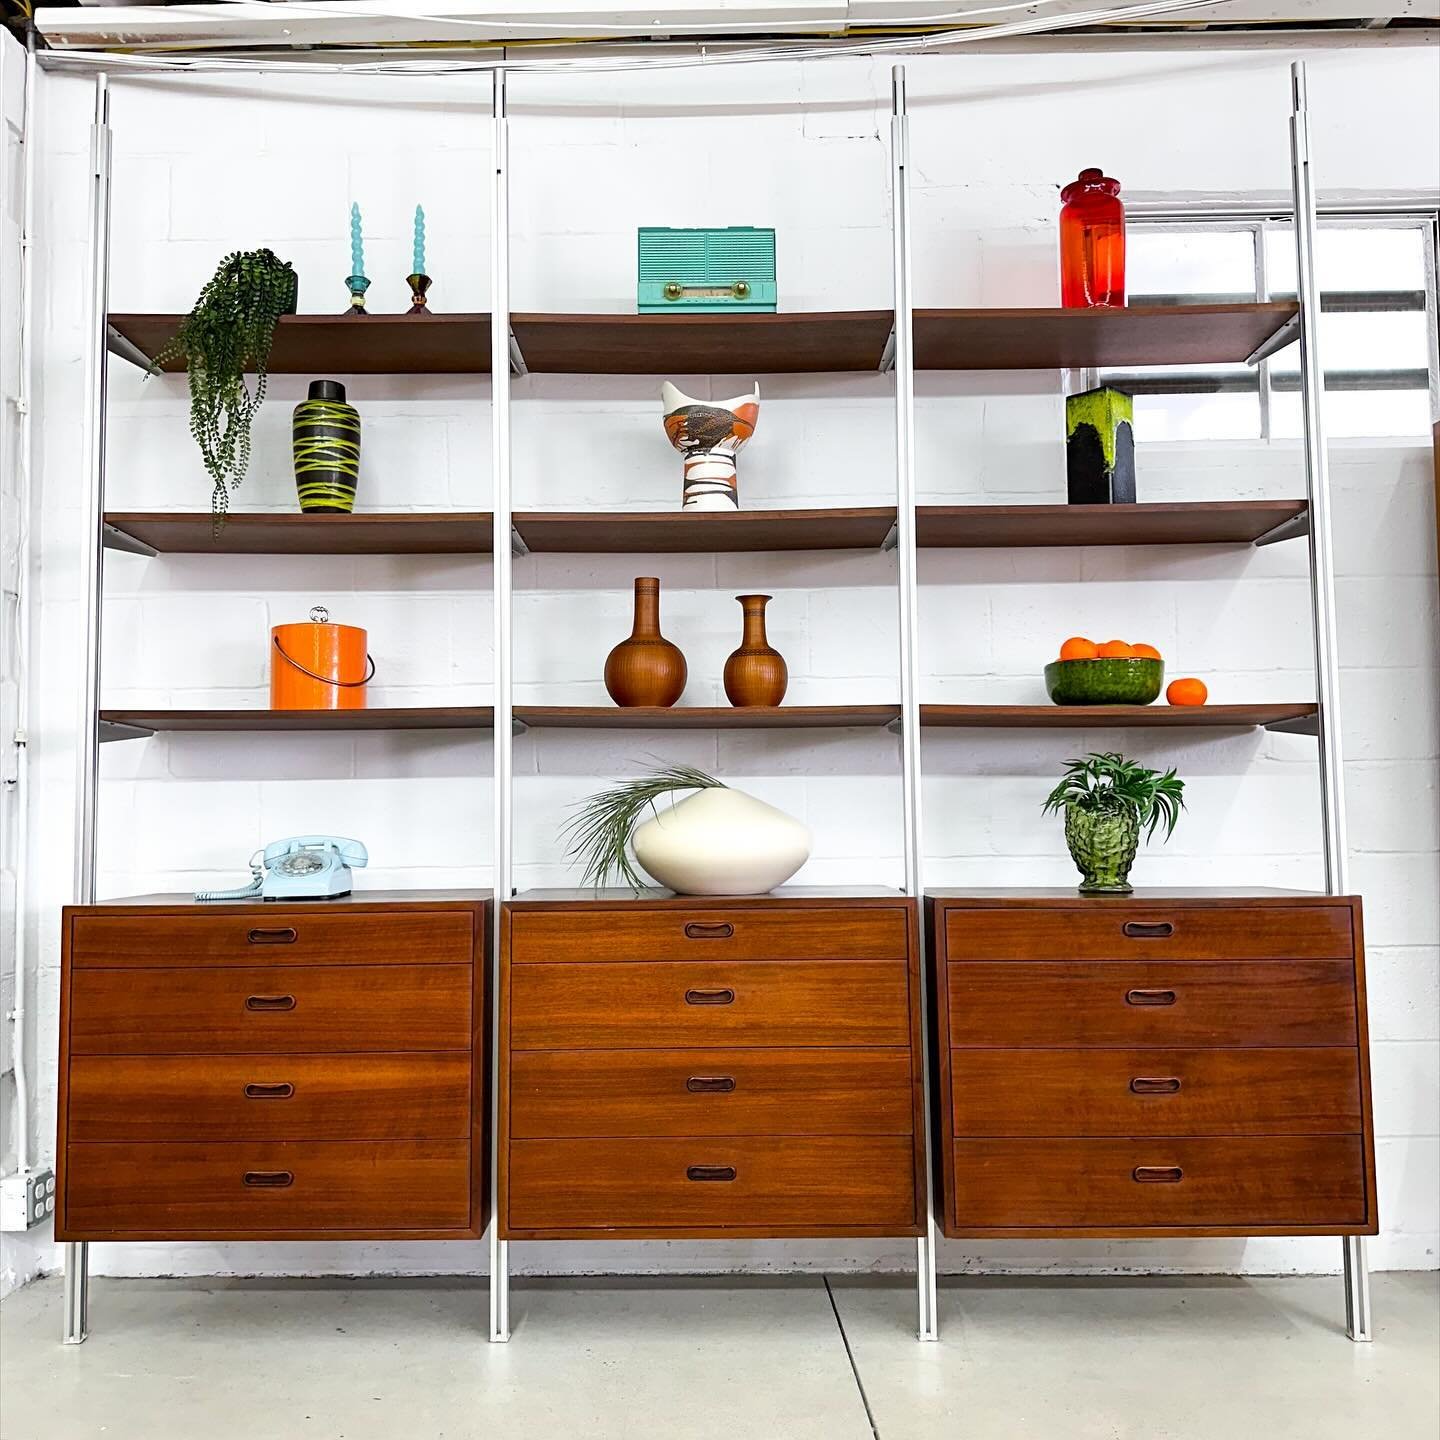 The OMNI wall unit system, designed by George Nelson in the 1950s. It truly is a beautiful system. Everything is adjustable, interchangeable, and customizable.

This came out of a Manhattan apartment from the original owners, who had a MASSIVE eleven